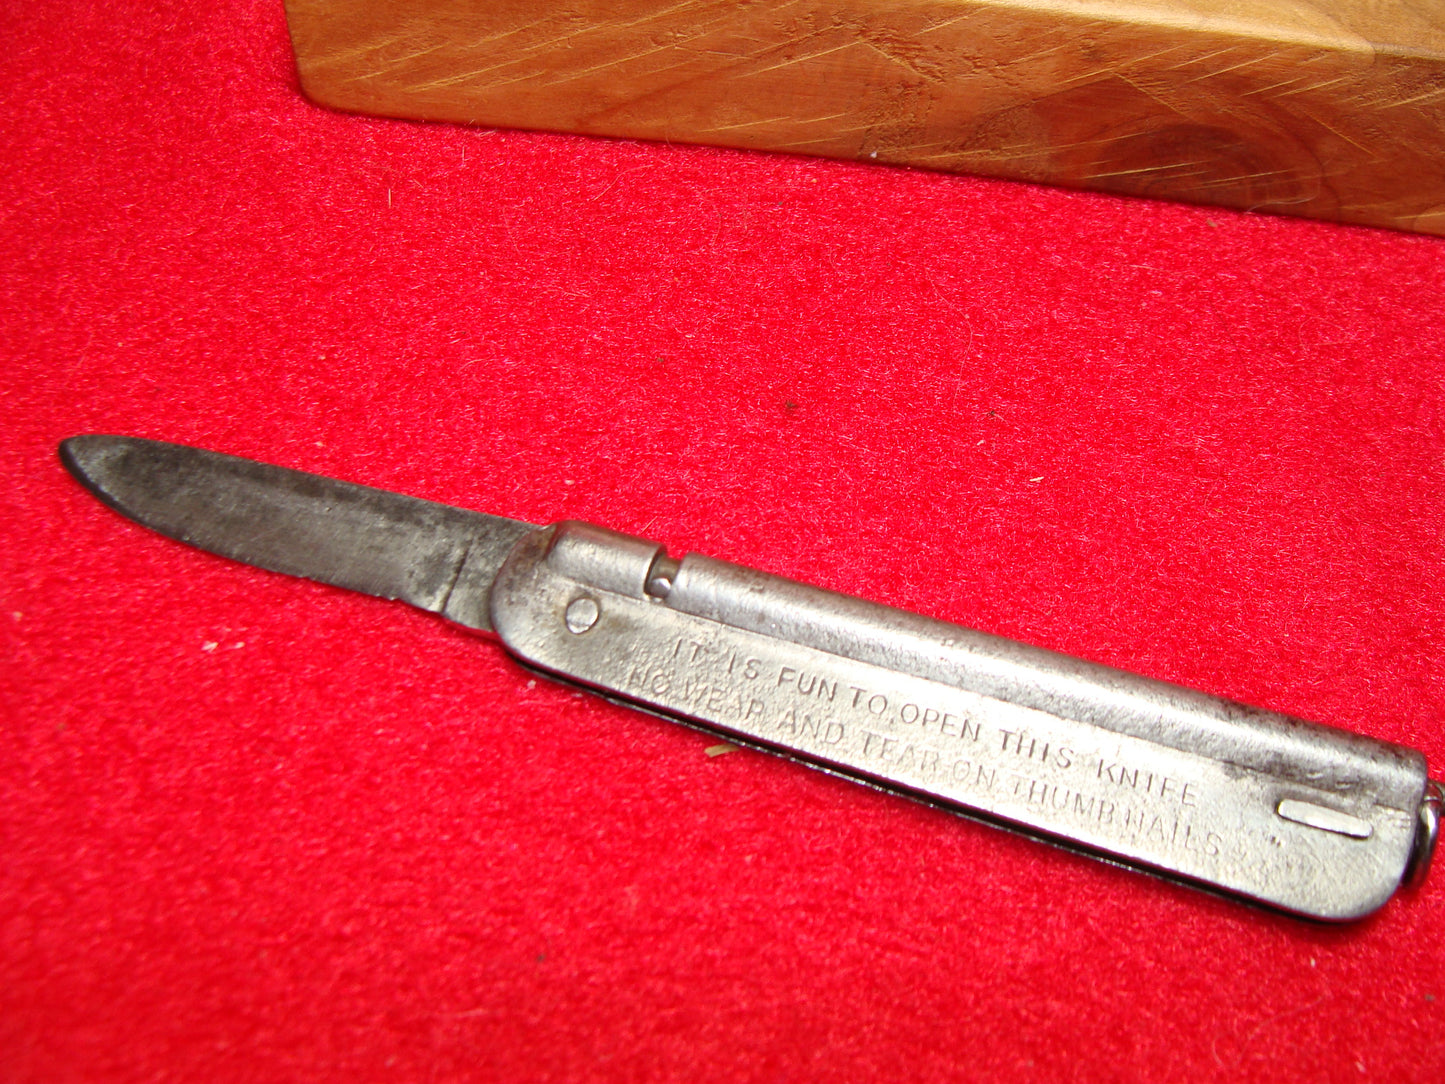 GEORGE MILLER NOVELTY PENKNIFE 1880-1889 BAIL RELEASE VINTAGE AMERICAN AUTOMATIC KNIFE ALL METAL